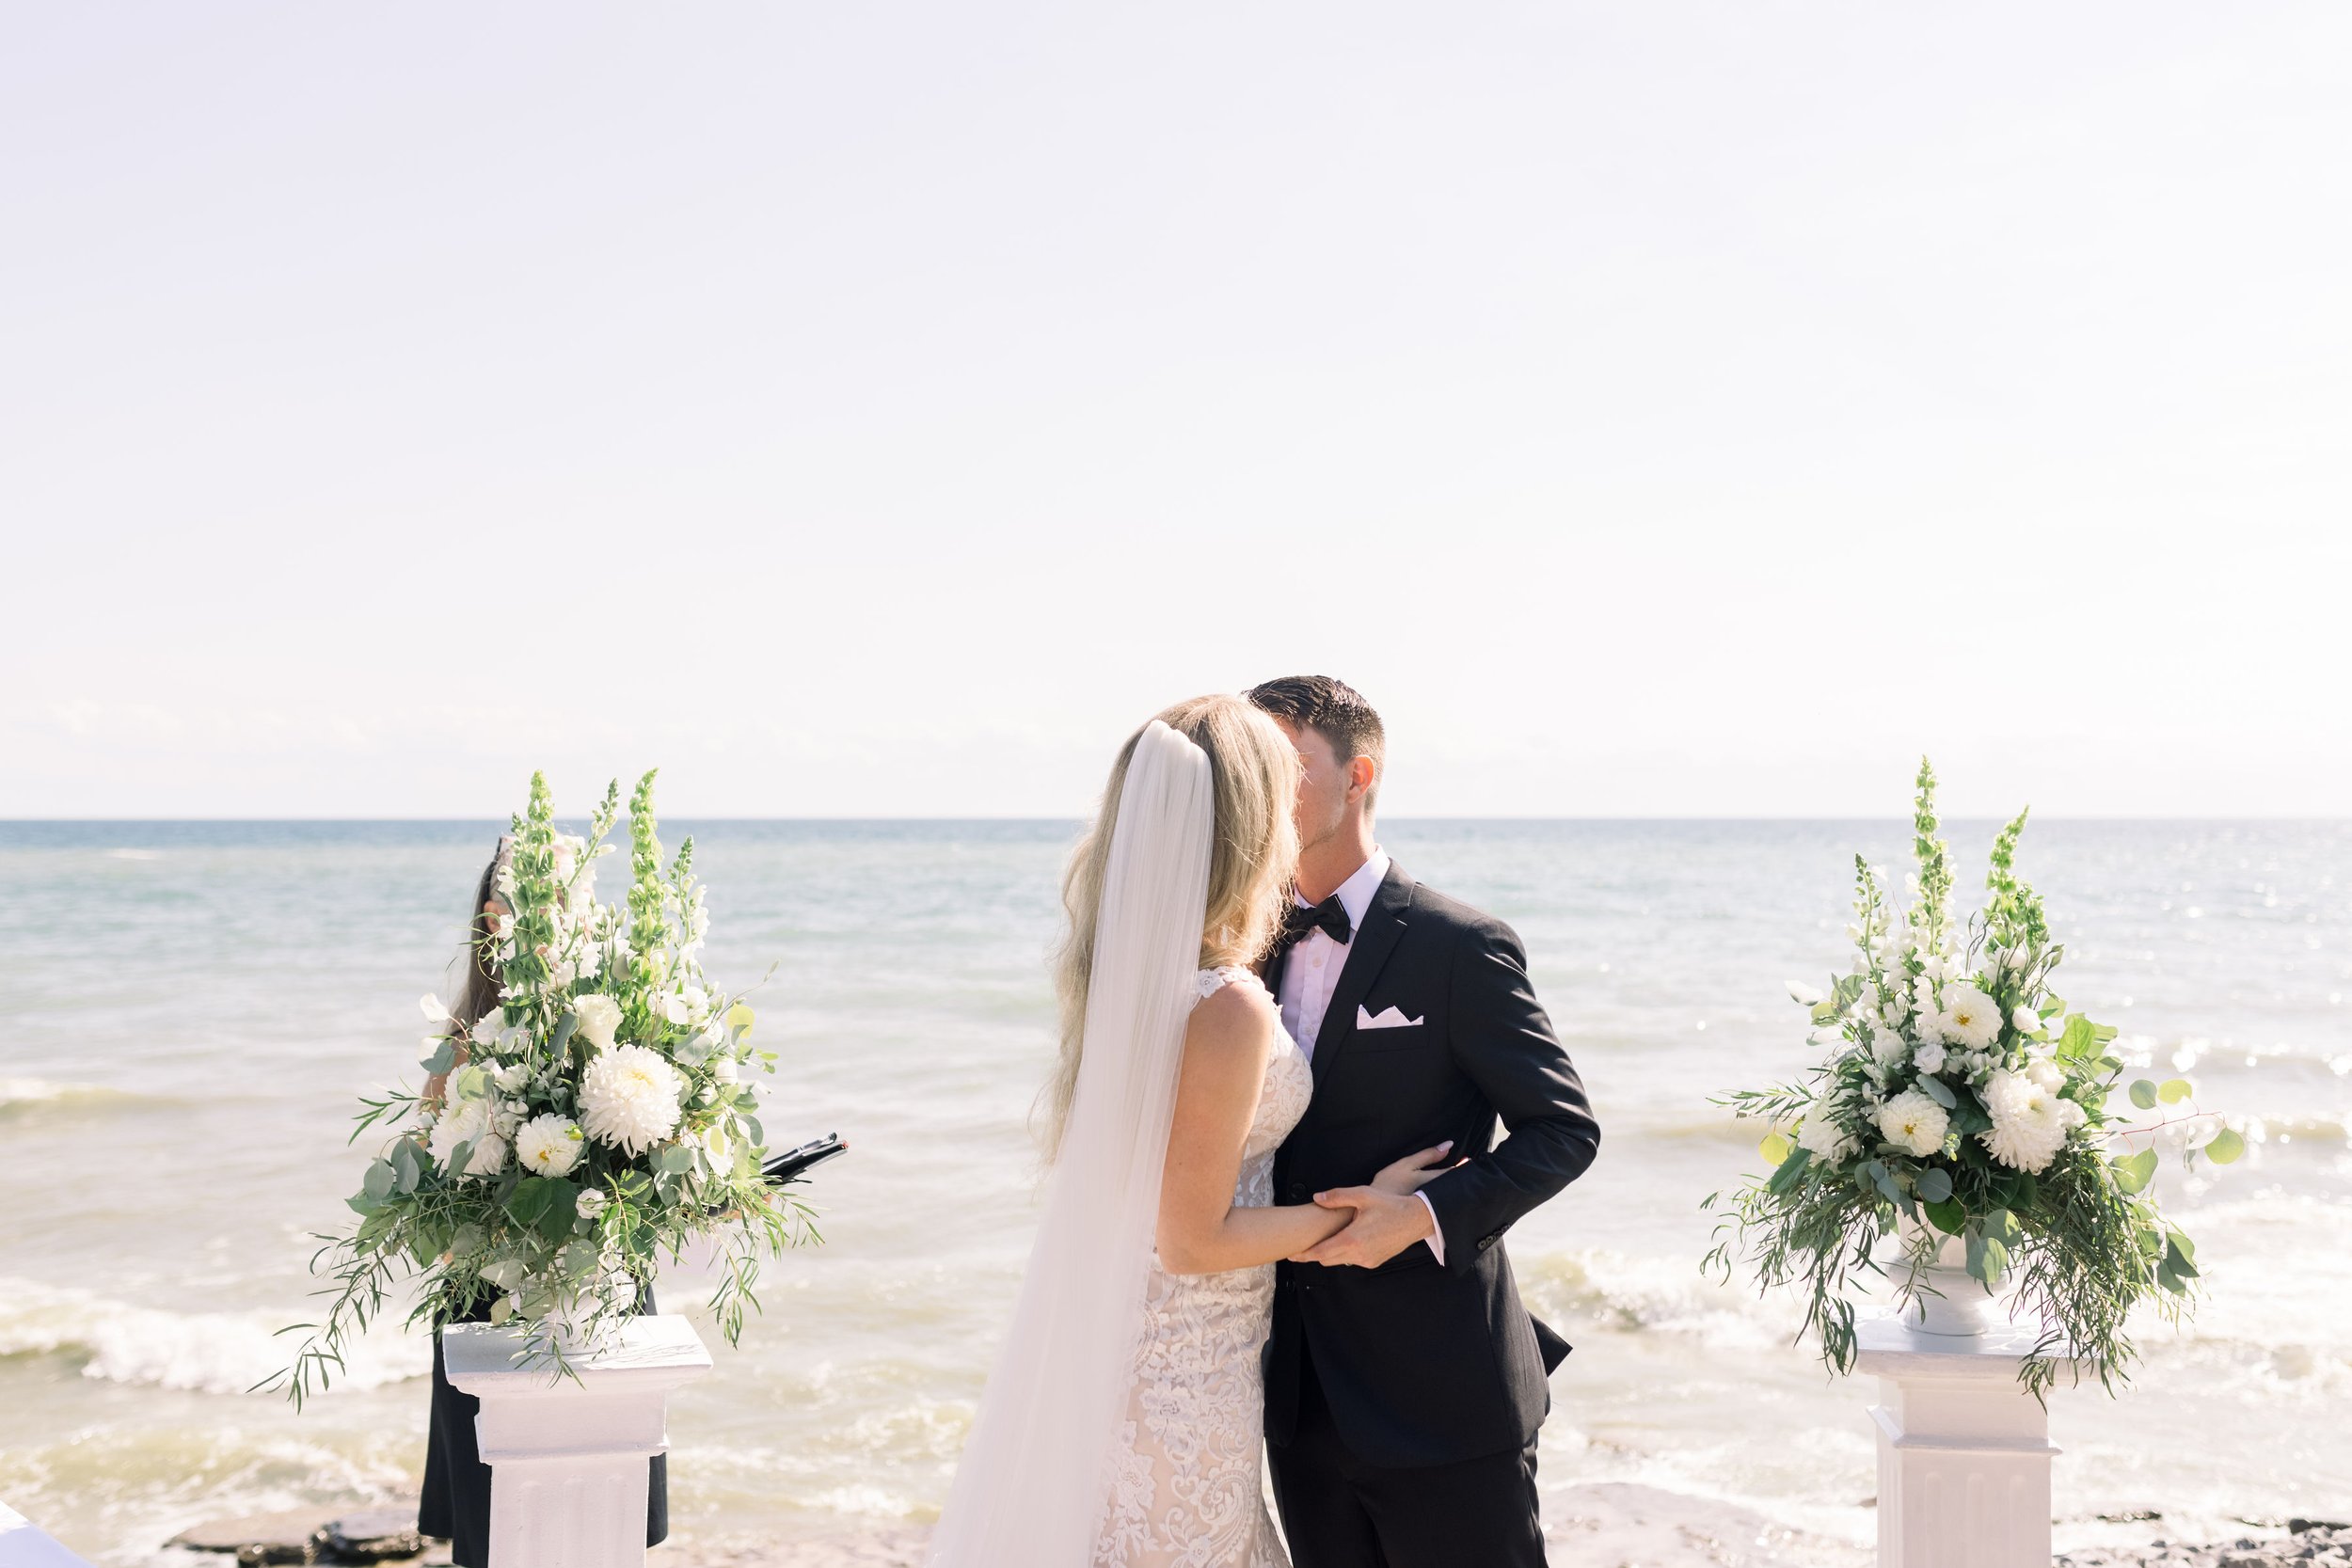  Chelsea Mason Photography captures a bride and groom's first kiss as a married couple. Prince Edwards County Weddings first kiss #ChelseaMasonPhotography #ChelseaMasonWeddings #PrinceEdwardsCountyWeddings #SandbanksWeddings #ONweddingphotographer 